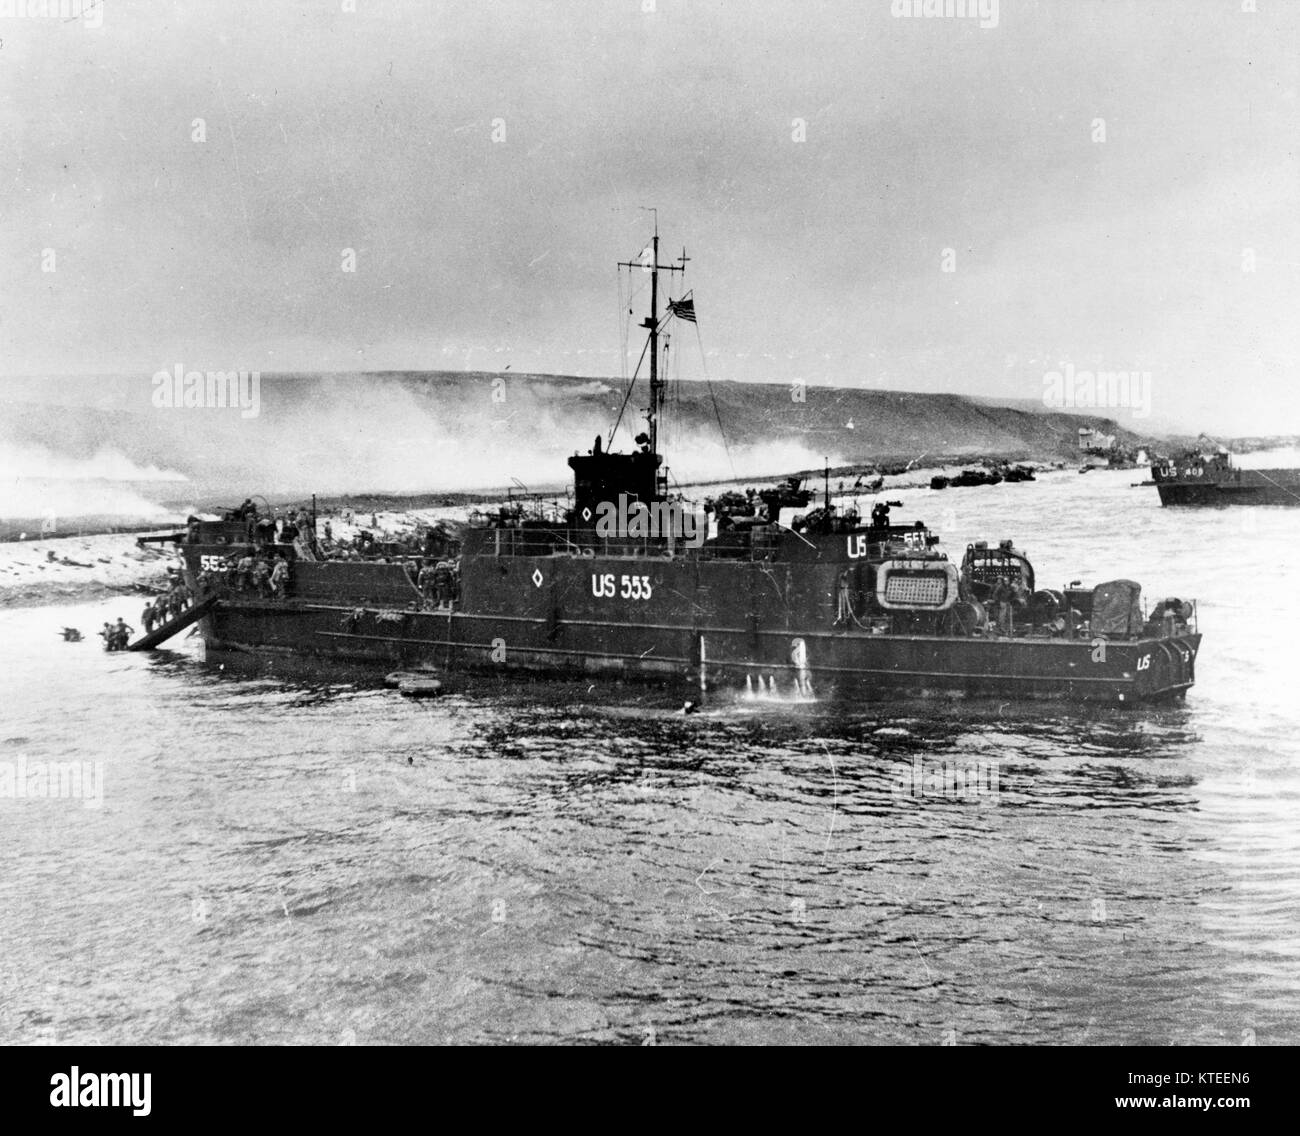 Normandy Invasion, June 1944 - USS LCI(L)-553 lands troops on Omaha Beach, during the initial D-Day assault, 6 June 1944. This LCI(L) was lost during this action. Stock Photo